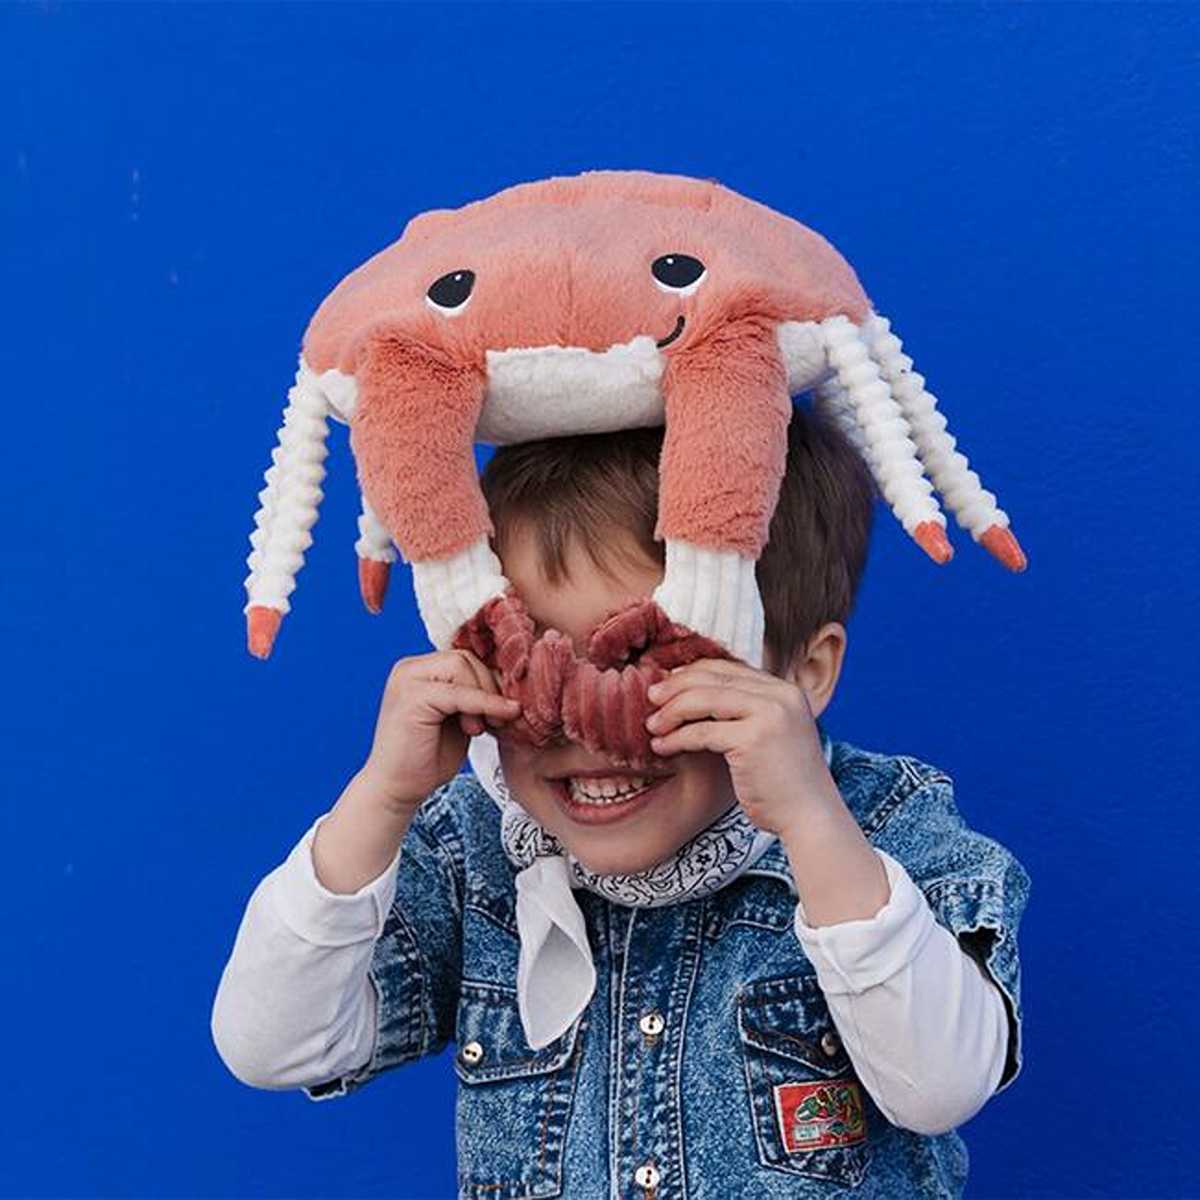 Les Ptipotos Mom and Baby Crab Plush Toy, 4895242700391 - ANB Baby